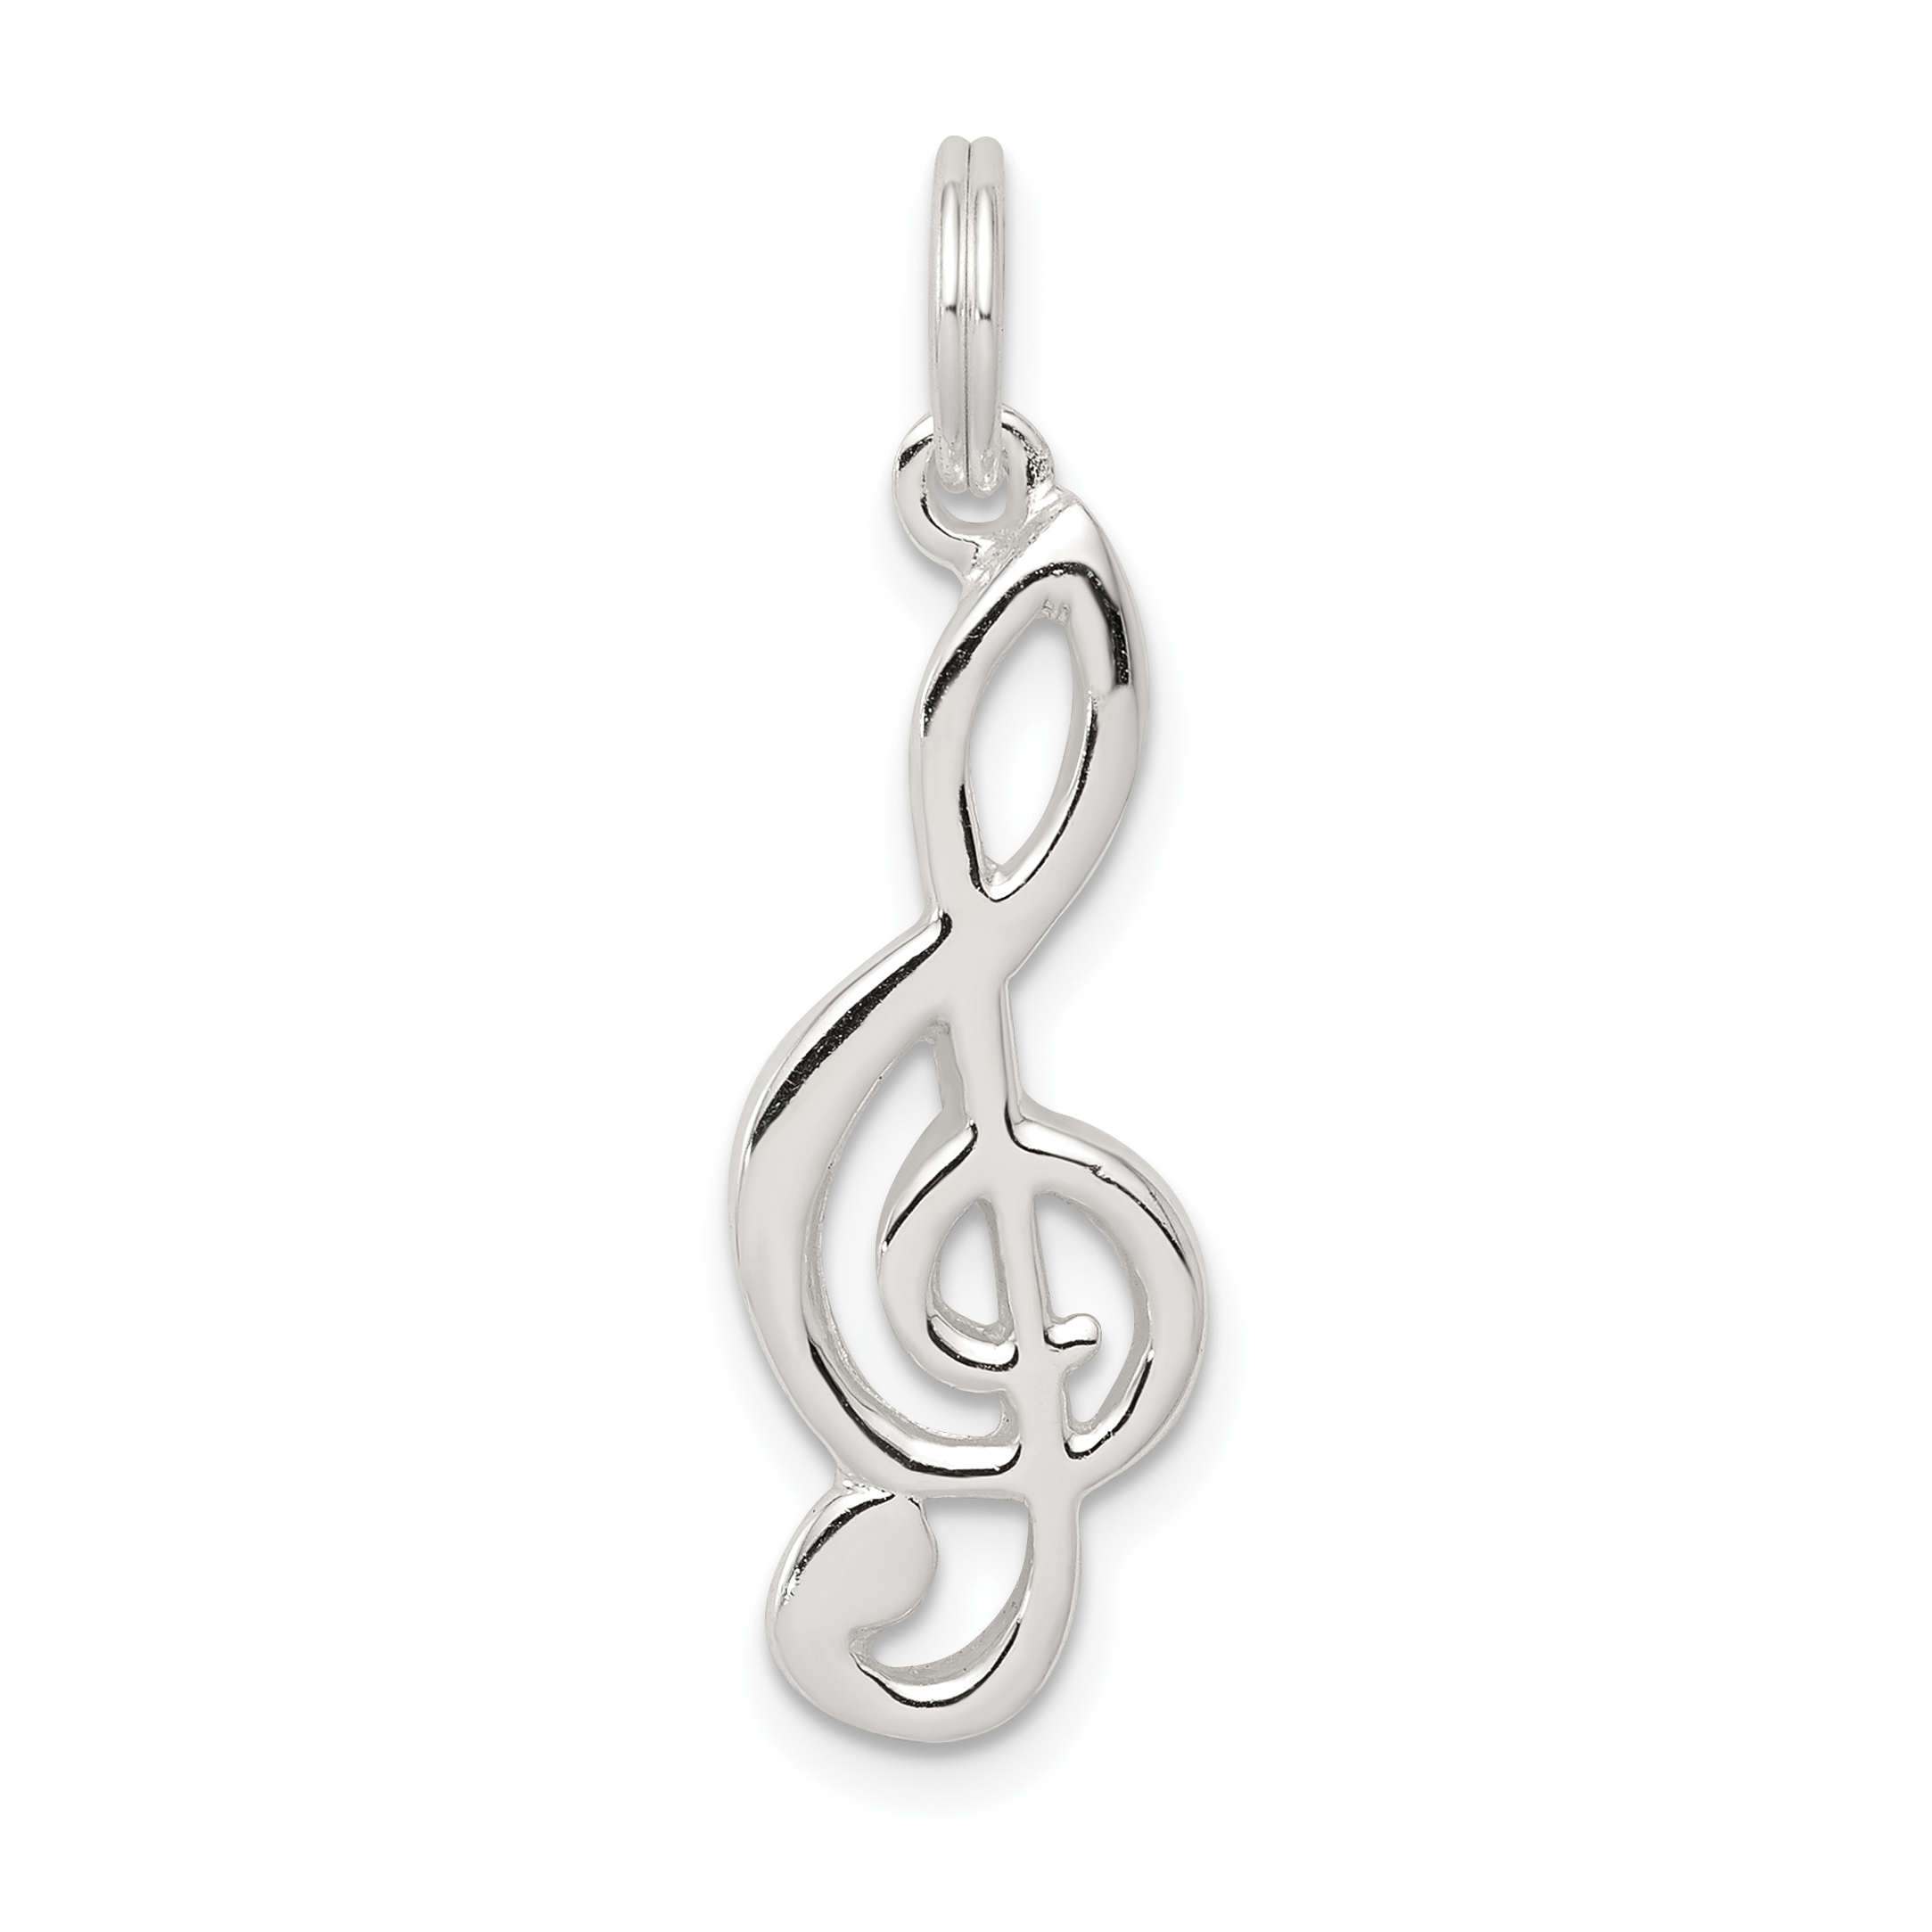 singing teacher gift orchestra choir musician band silver music note charm necklace